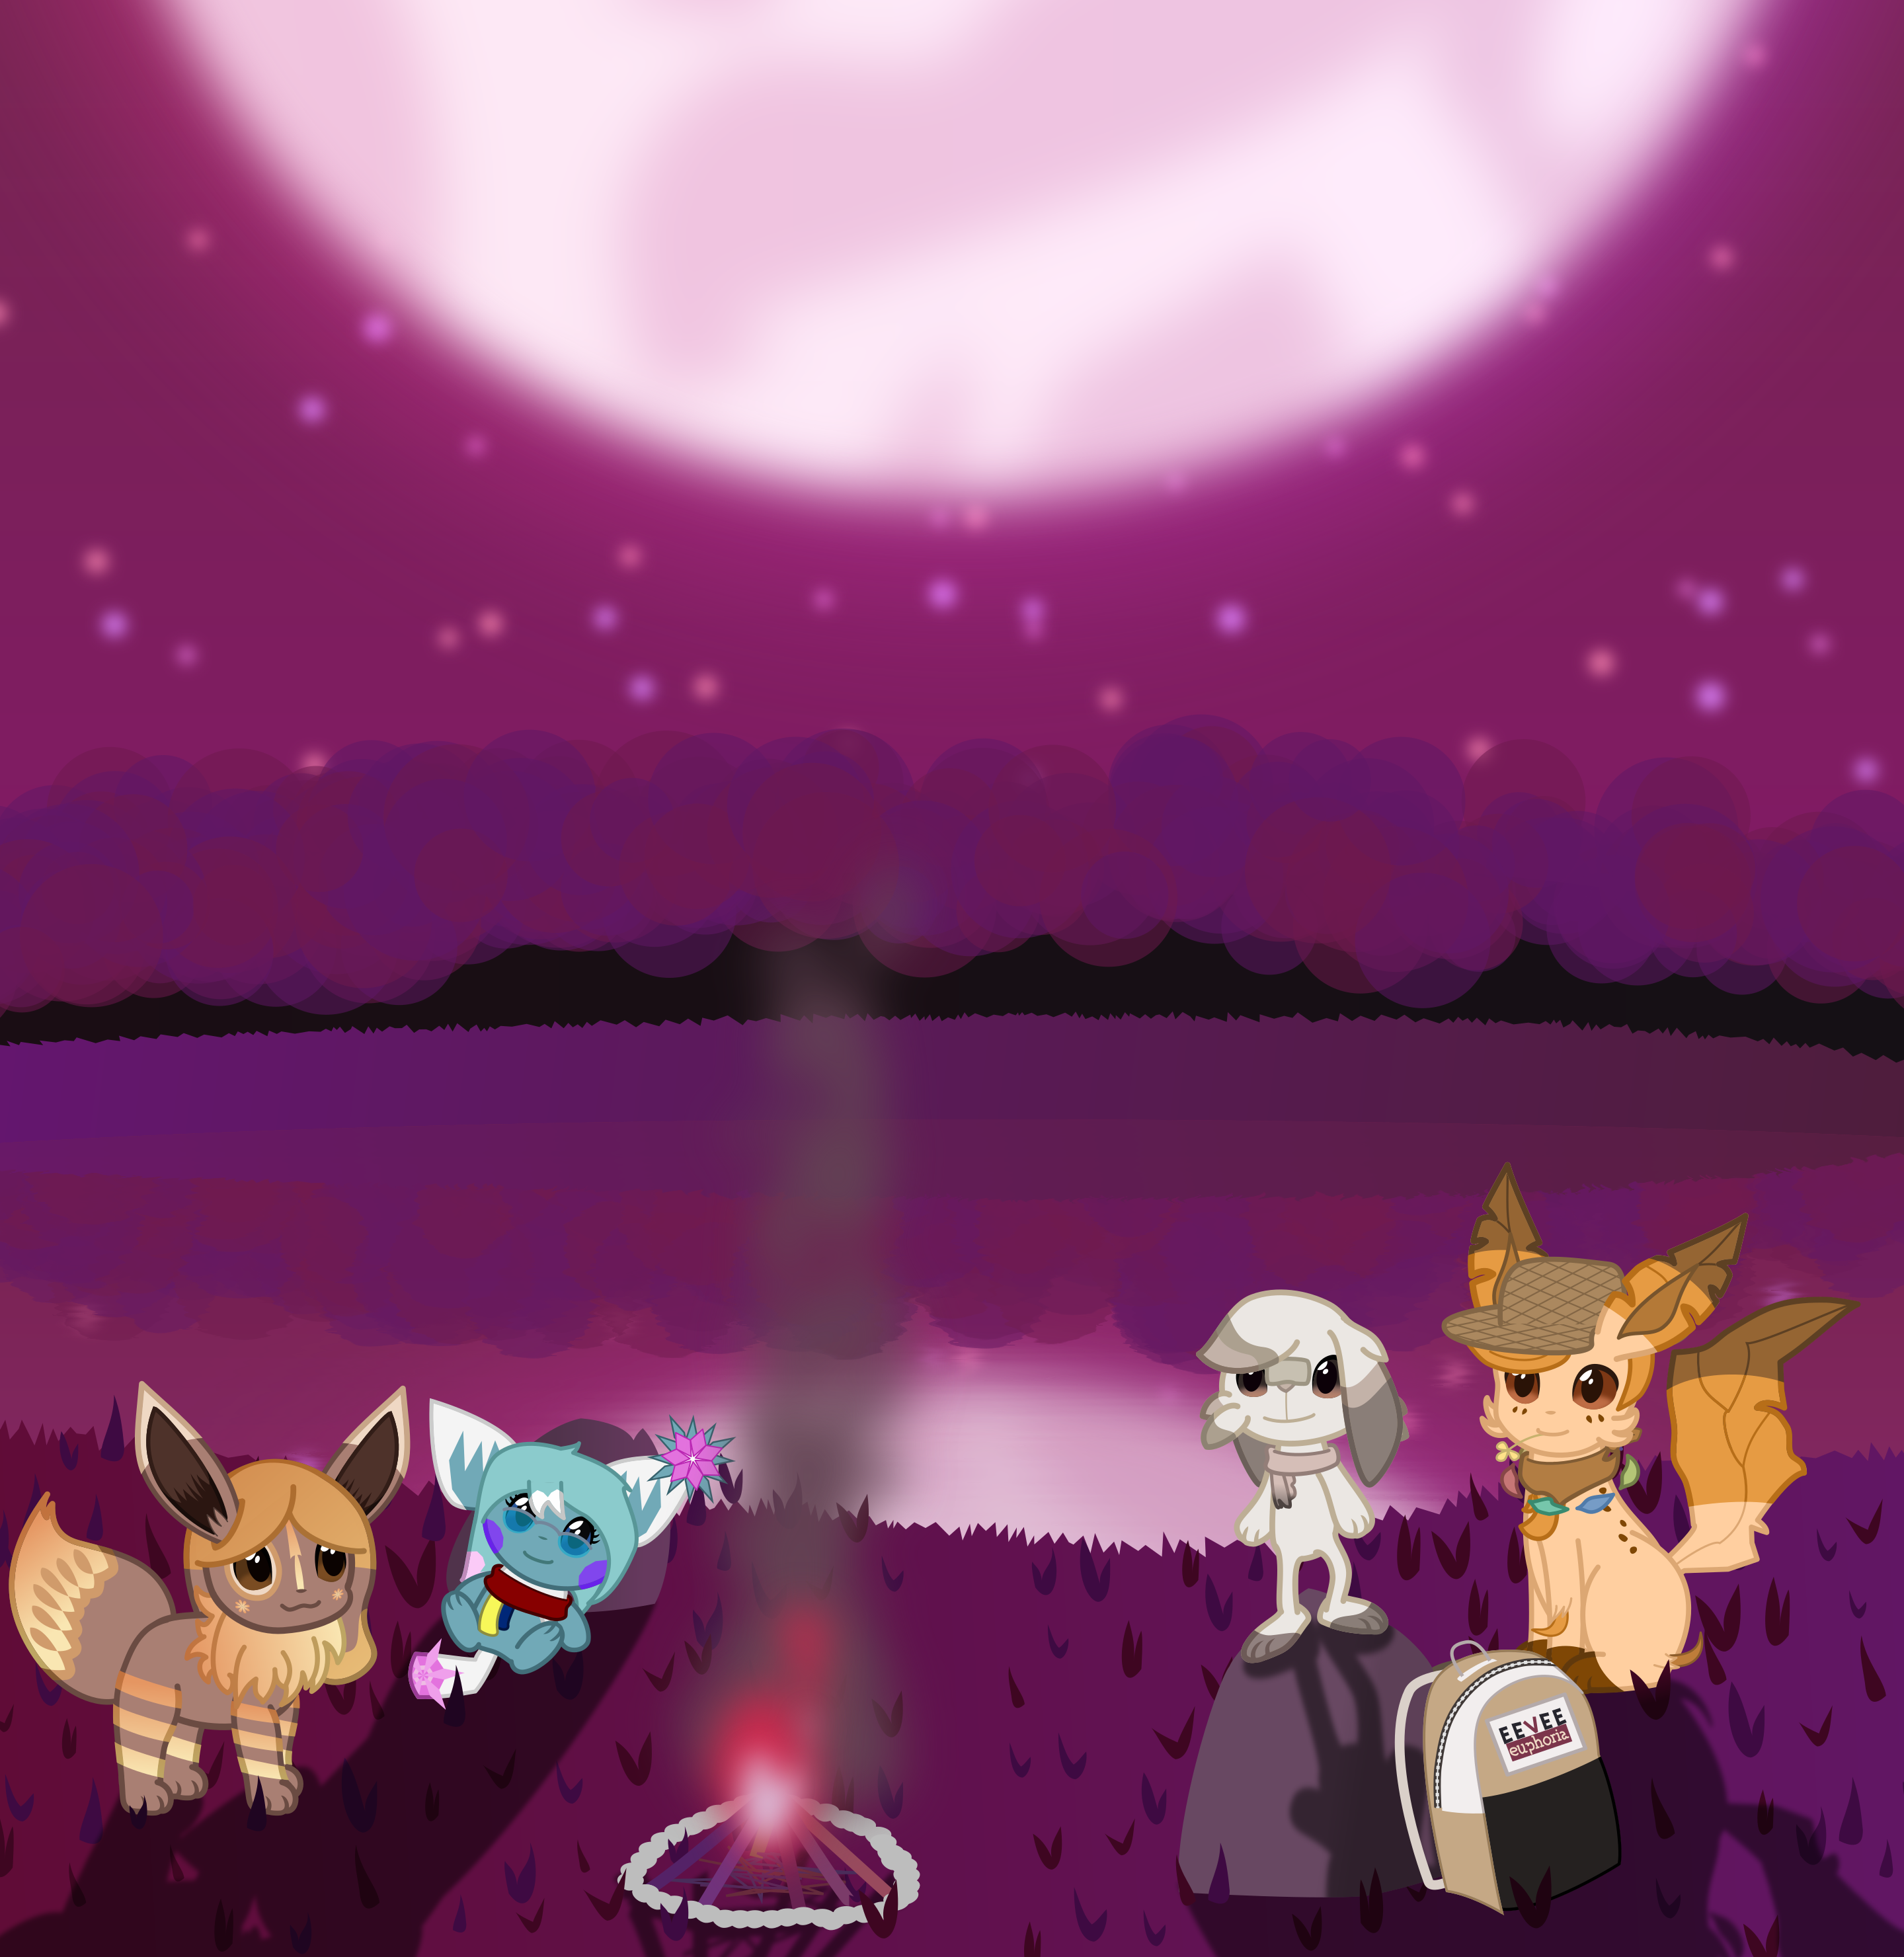 An eevee, pichu, scorbunny, and leafeon all look up at the moon, all standing on a purpleish hill.